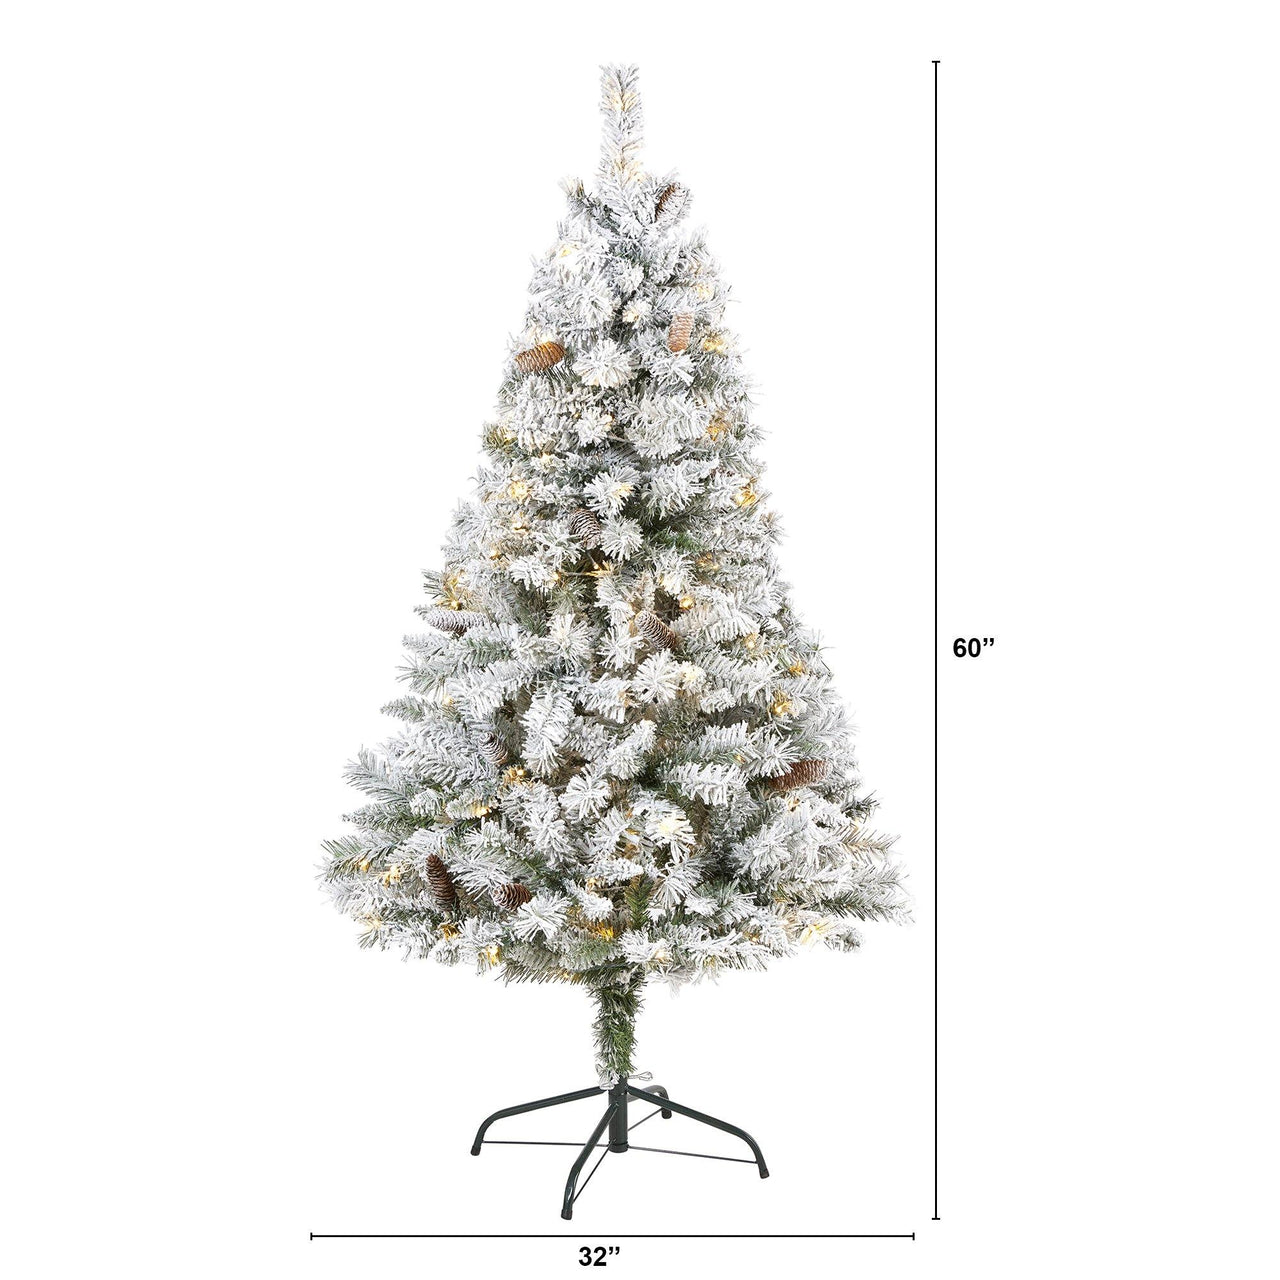 5' Flocked White River Mountain Pine Artificial Christmas Tree with Pinecones and 150 Clear LED Lights - The Fox Decor